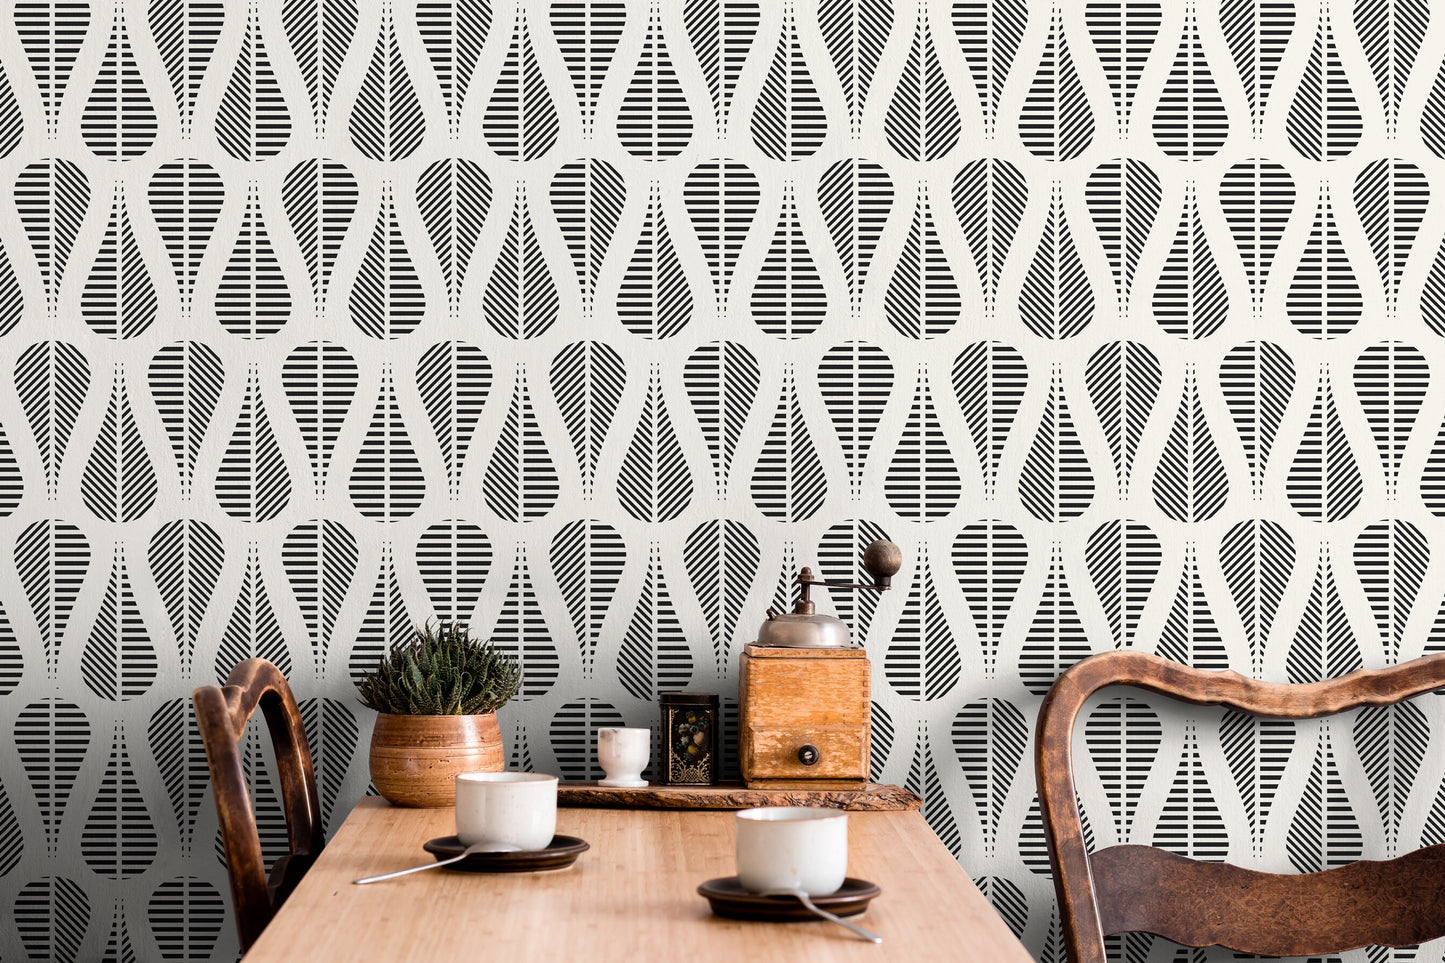 Wallpaper Peel and Stick Wallpaper Removable Wallpaper Home Decor Wall Art Wall Decor Room Decor / Black Abstract Wallpaper - C328